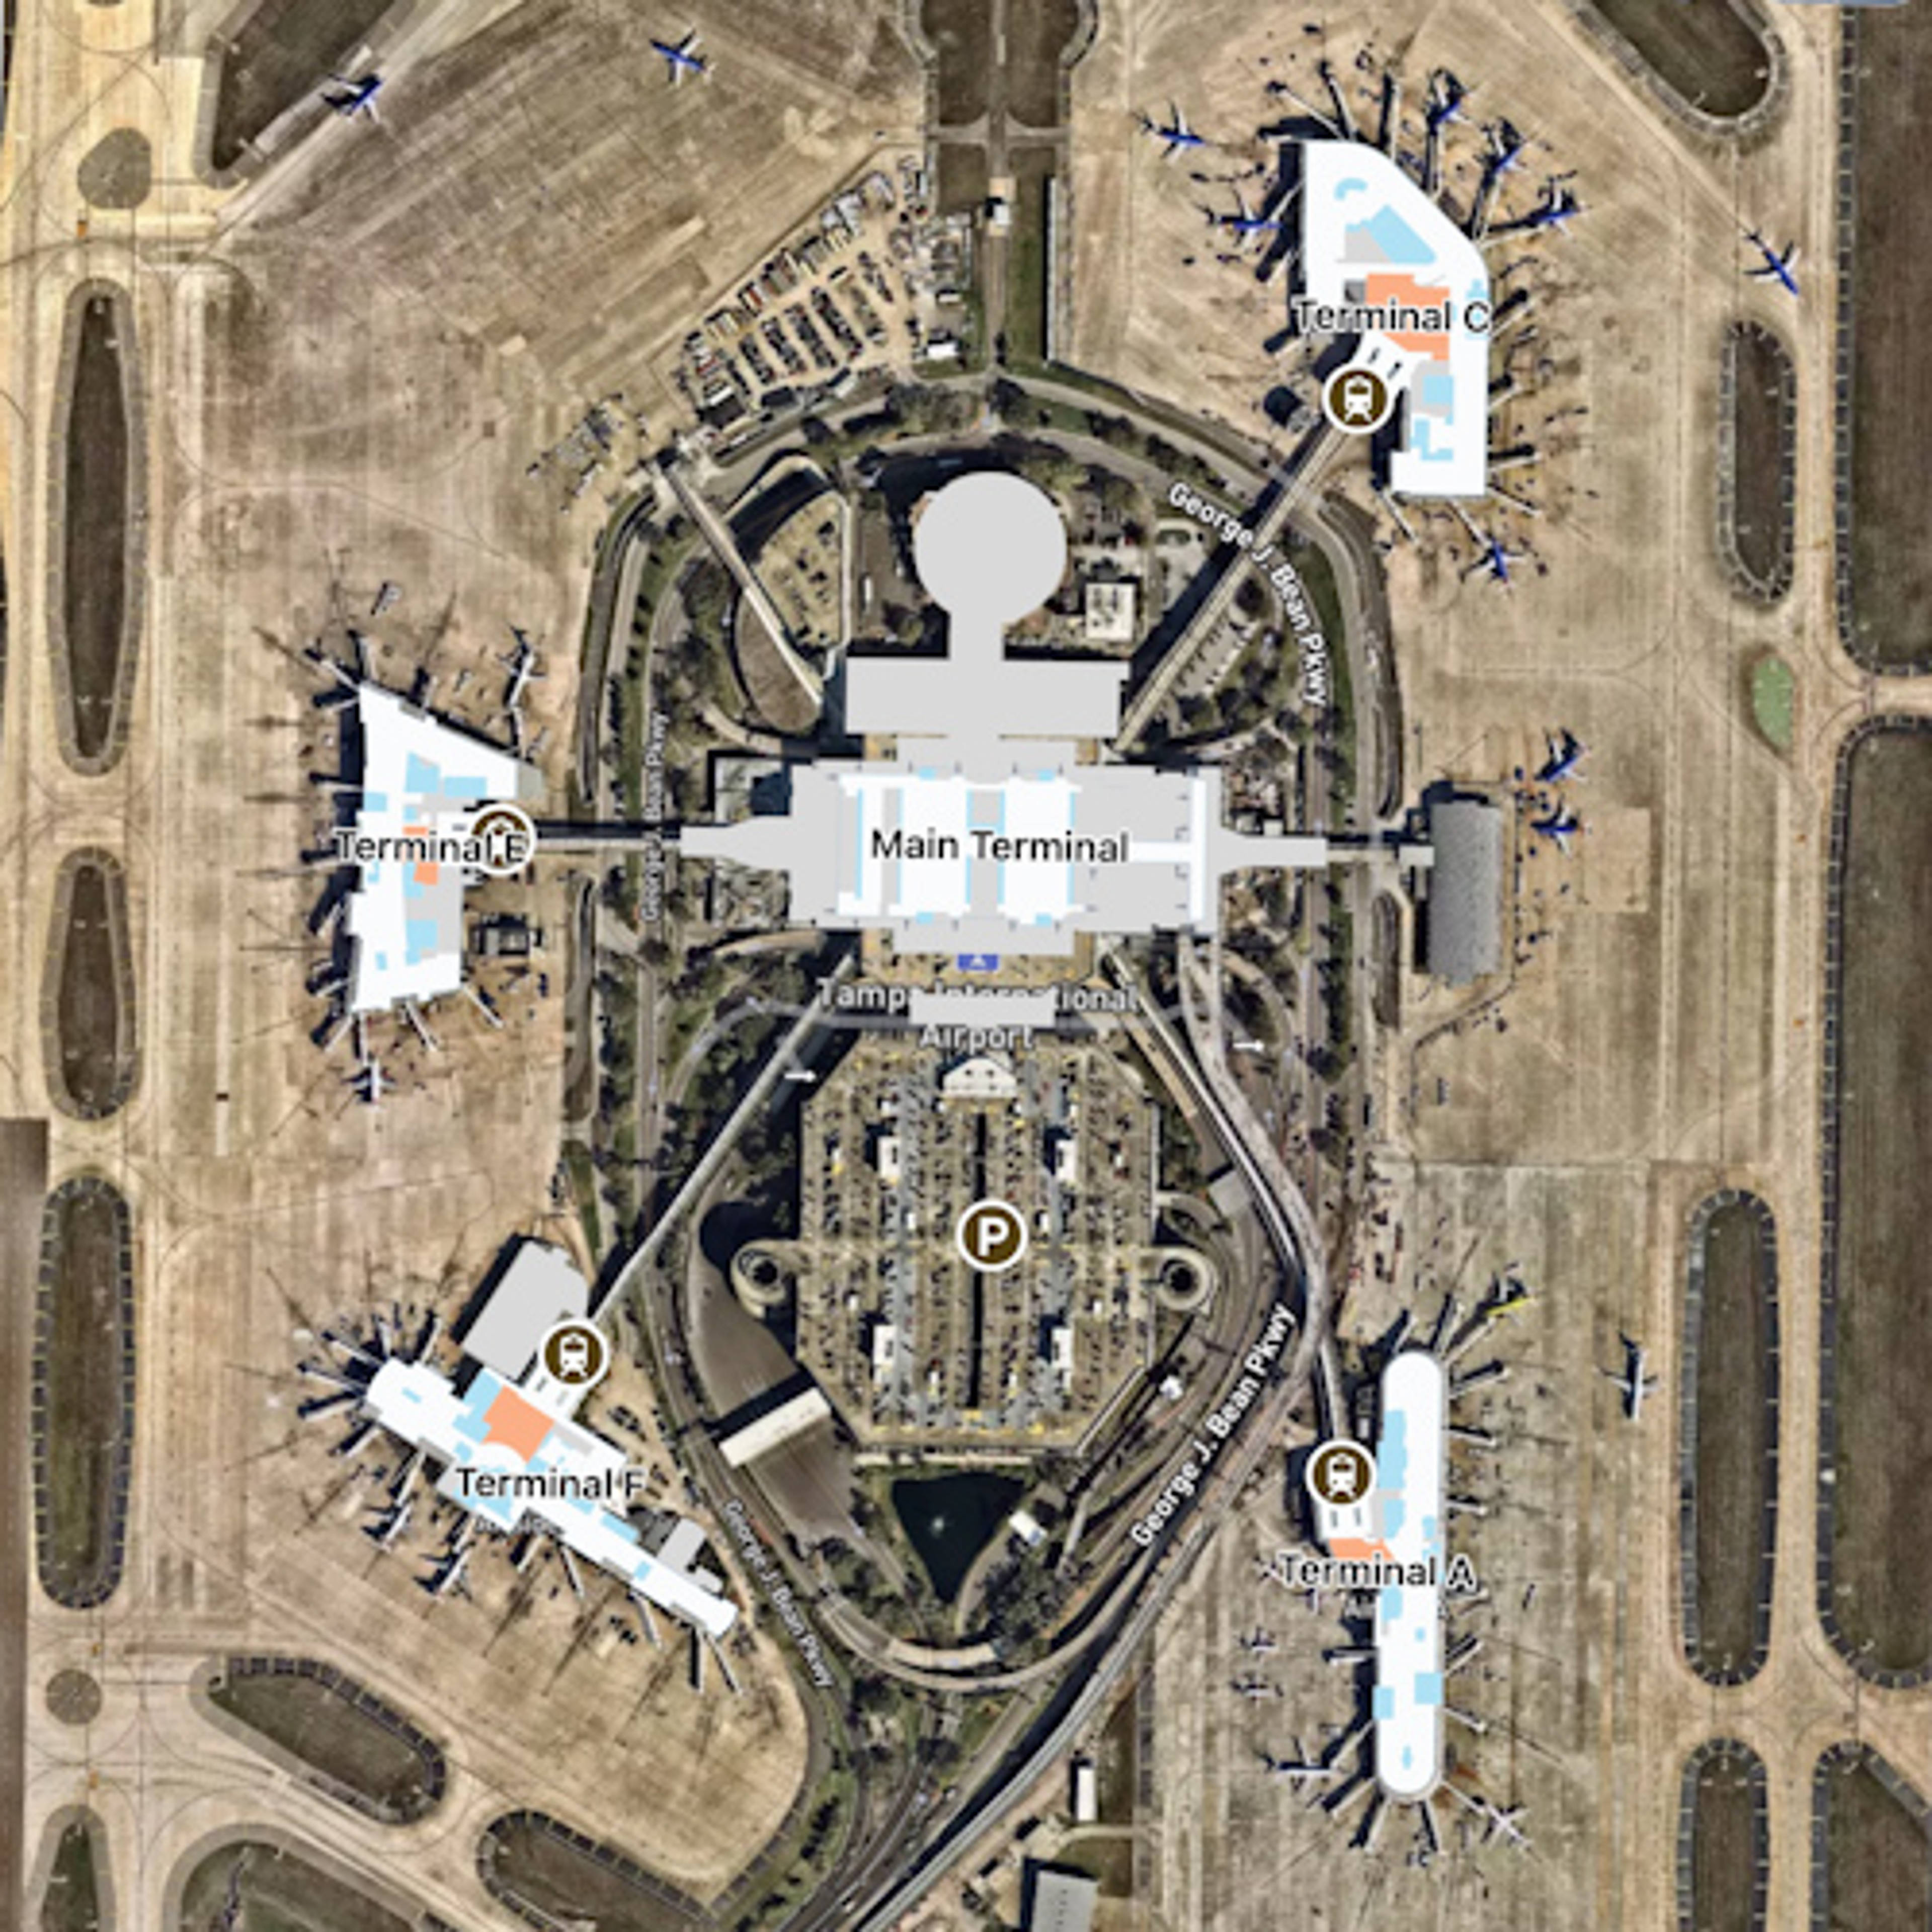 Tampa Airport Overview Map